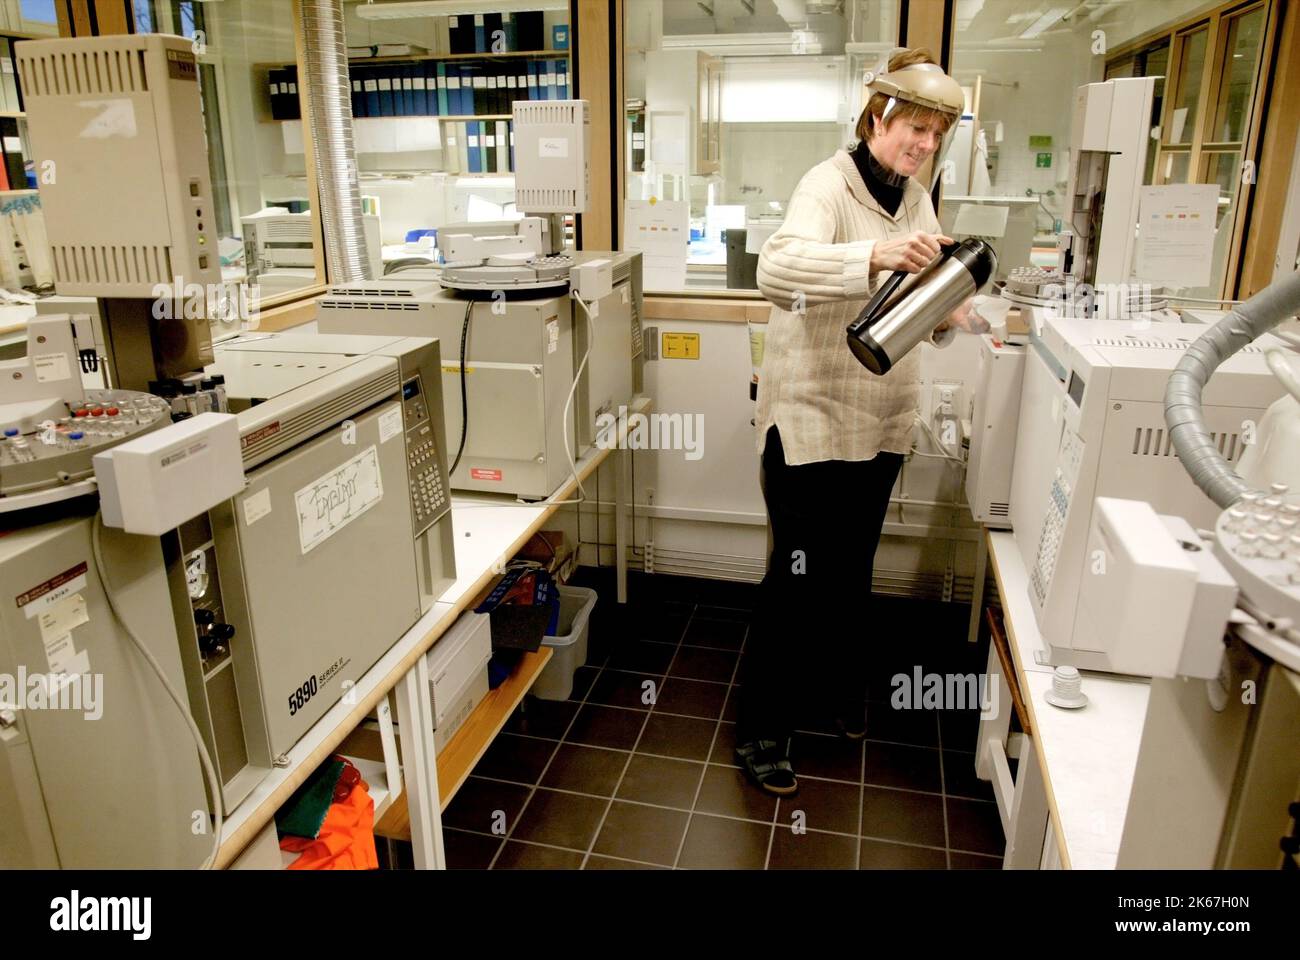 The National Laboratory of Forensic Science, Statens kriminaltekniska laboratorium in Linköping Sweden. It is tasked with assisting the Swedish police in investigating crimes. The agency performs laboratory analyses of samples which have been taken from various types of crime scenes. In the picture: The drug analysis unit. Stock Photo